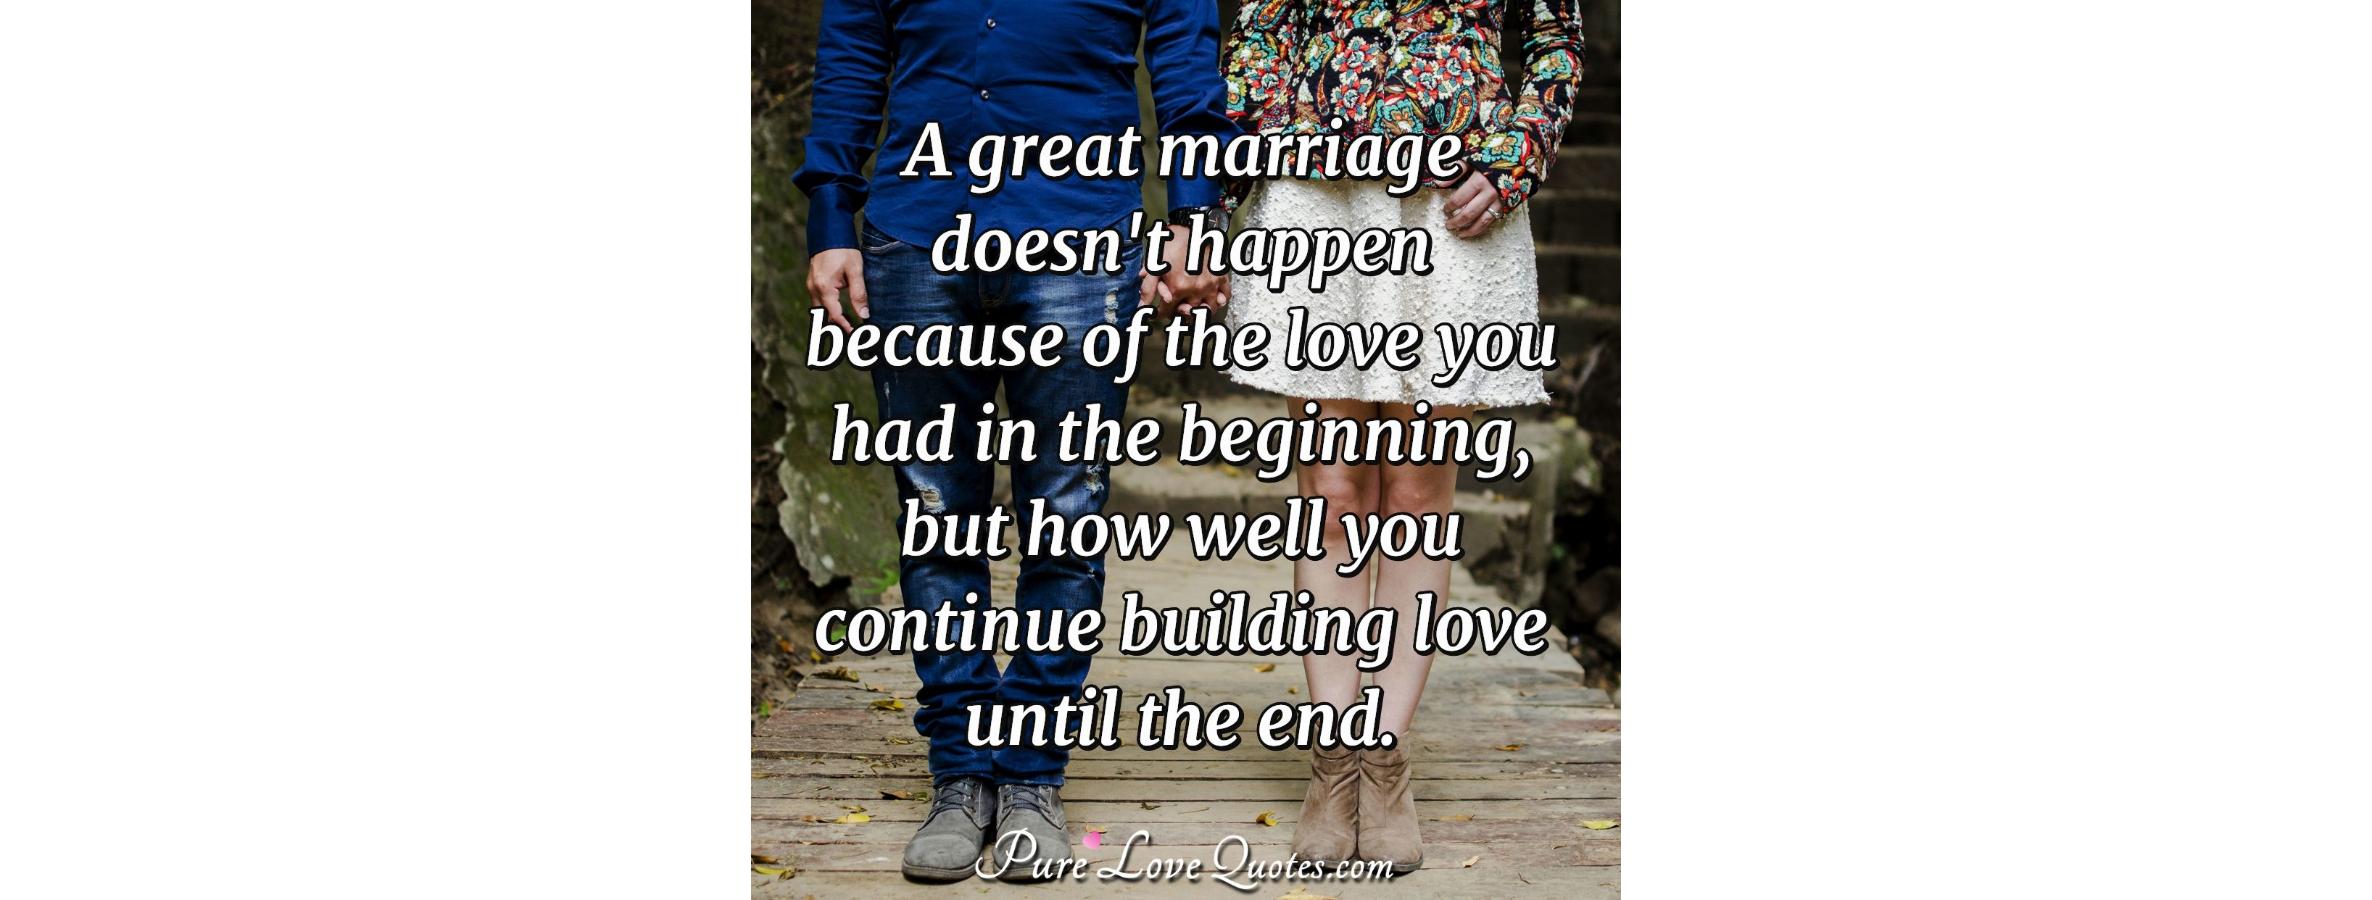 A Great Marriage Doesnt Happen Because Of The Love You Had In The Beginning Purelovequotes 